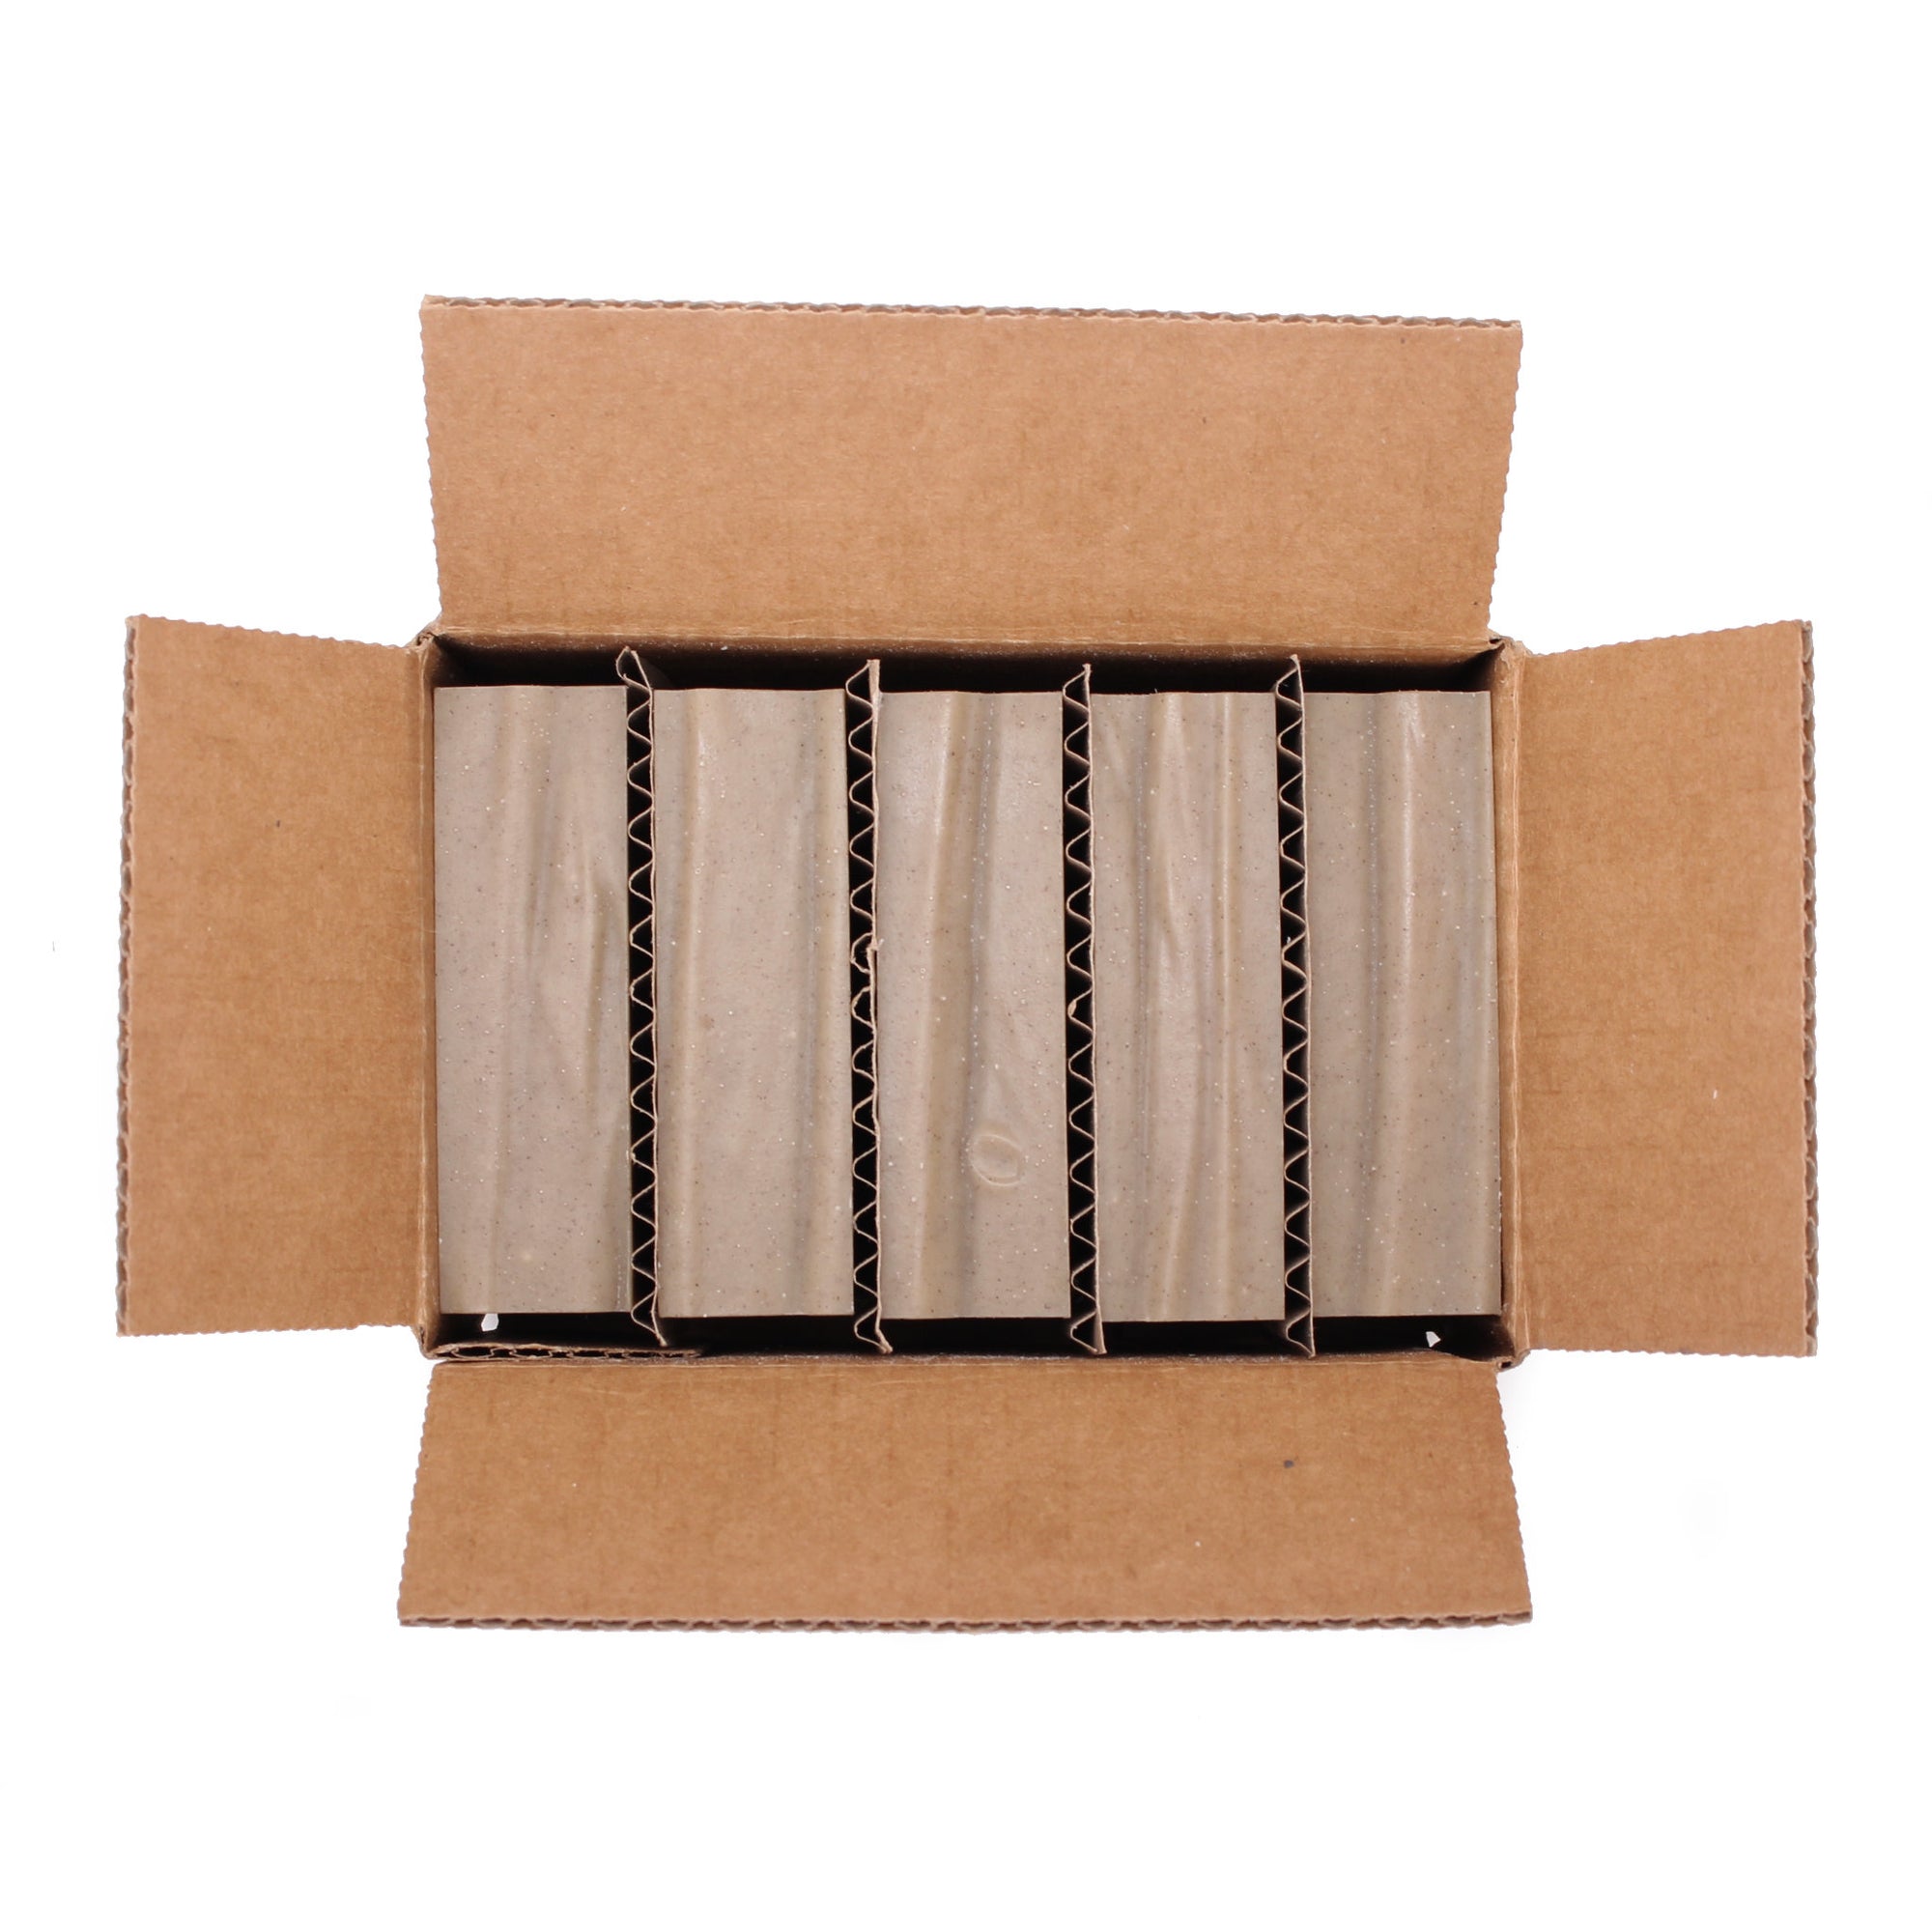 A naked five pack of unpackaged Aum Patchouli essential oil organic bar soap from Ground Soap in a shipping box.